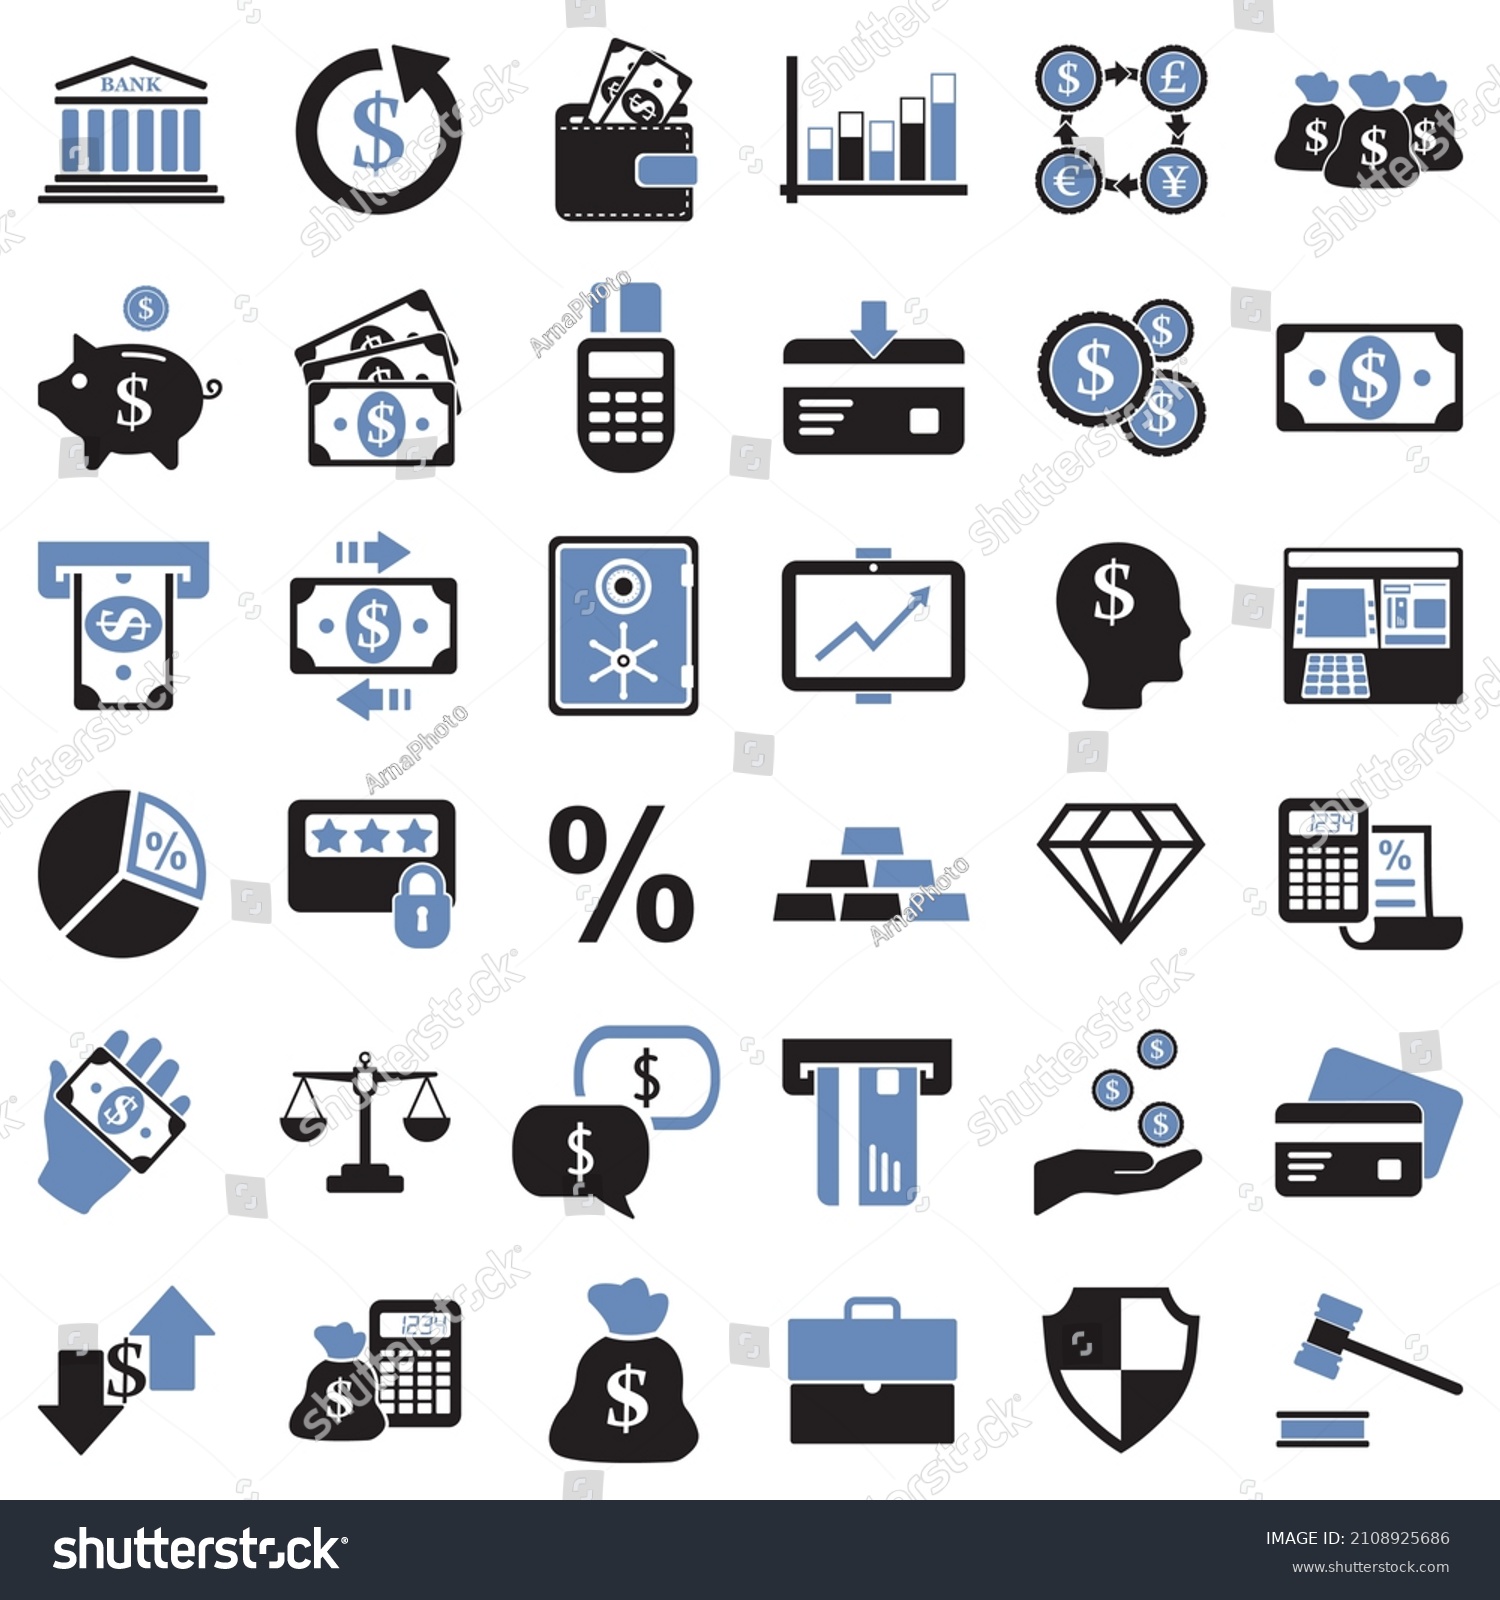 SVG of Banking Icons. Two Tone Flat Design. Vector Illustration. svg